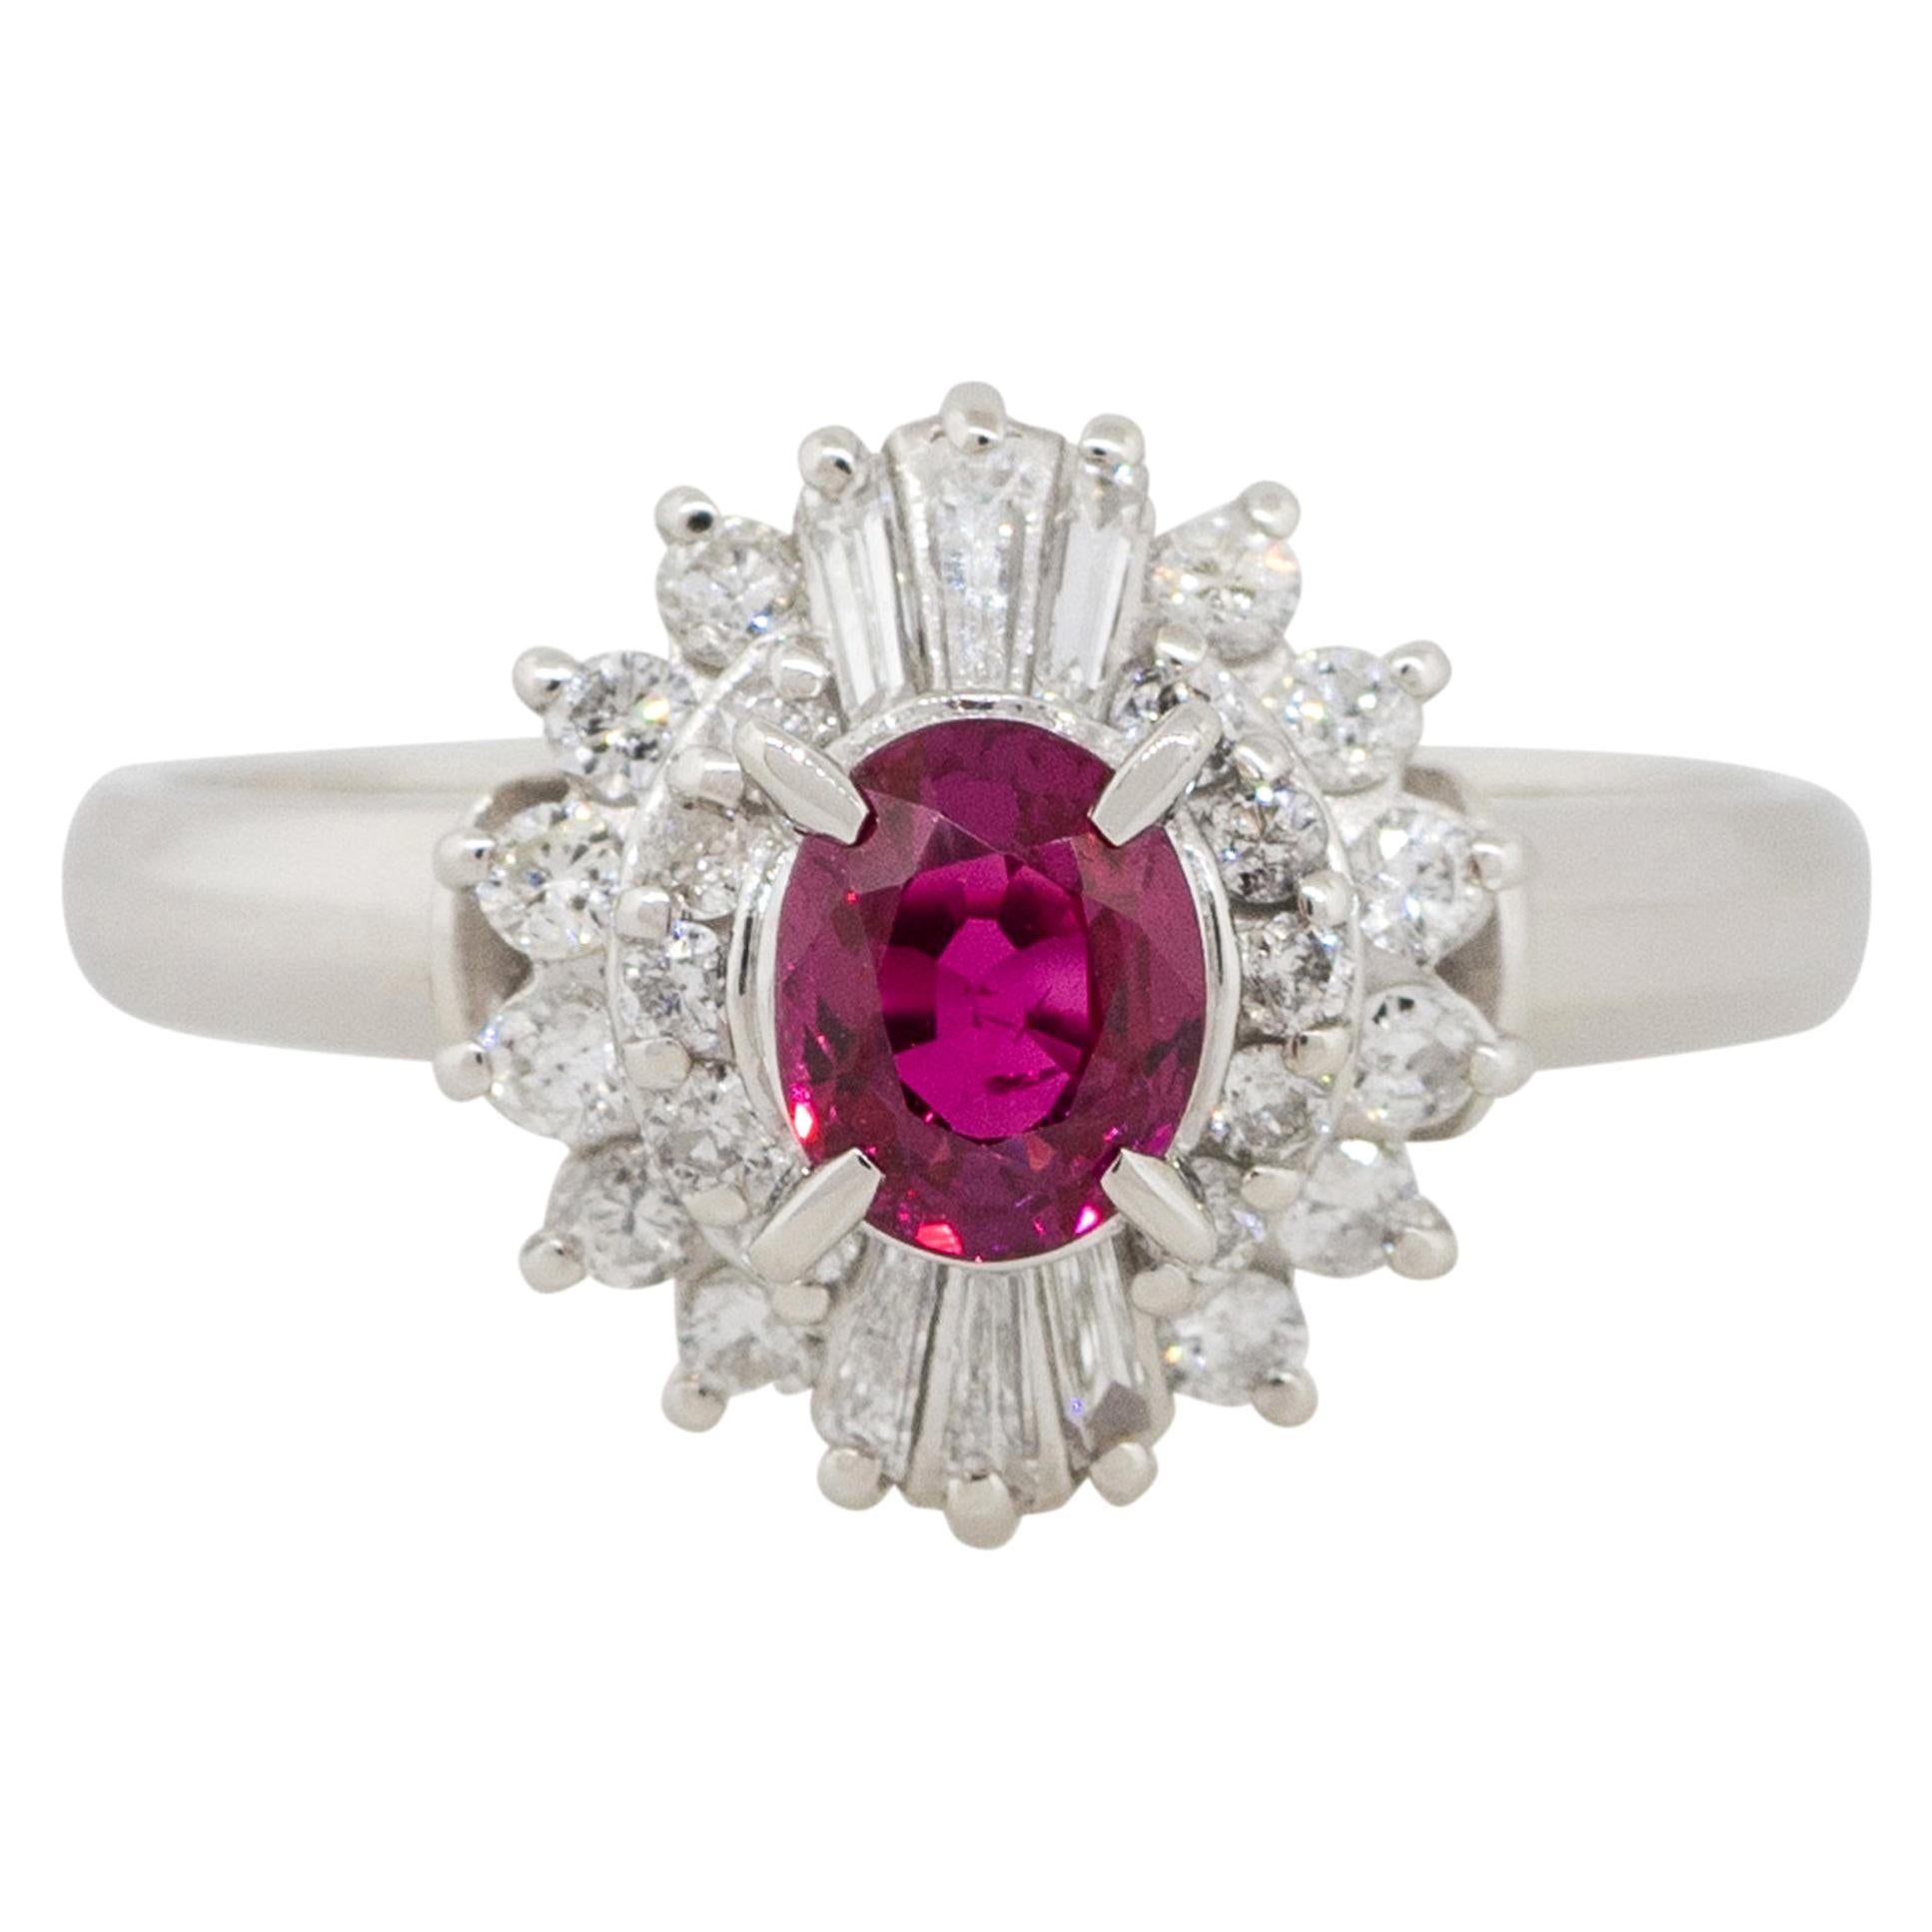 0.72 Carat Oval Ruby Center Diamond Cocktail Ring Platinum in Stock For Sale